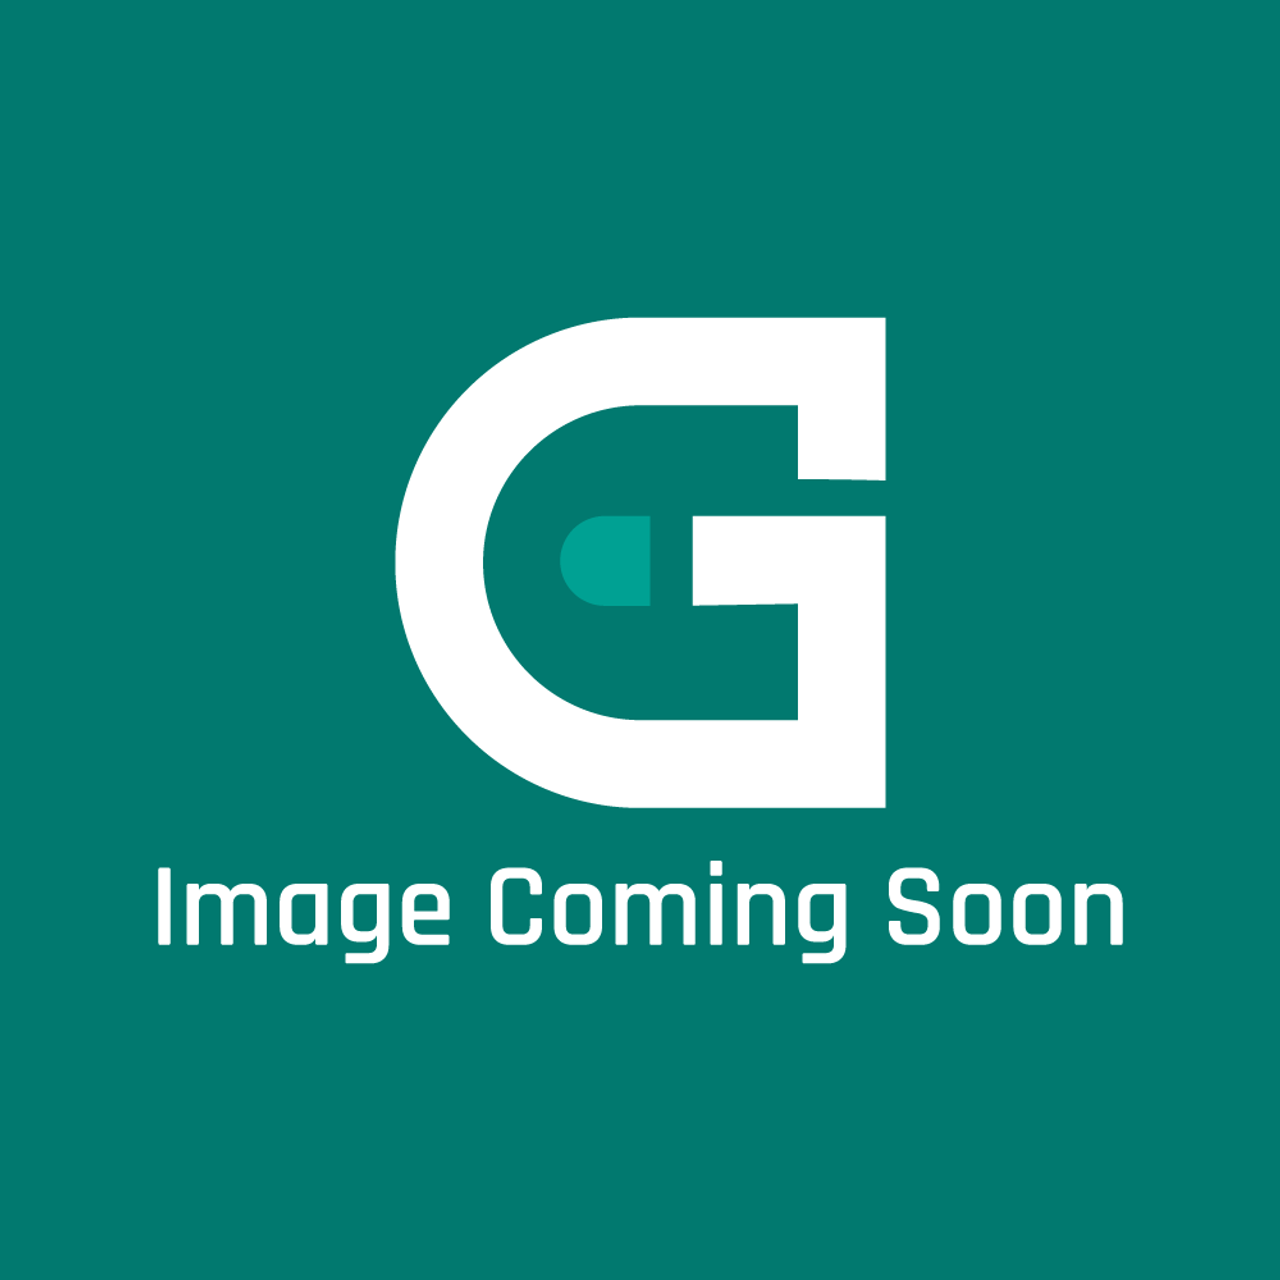 AGA Marvel R4810 - Comb Hd Housing(Emx)Bft11522/1 - Image Coming Soon!